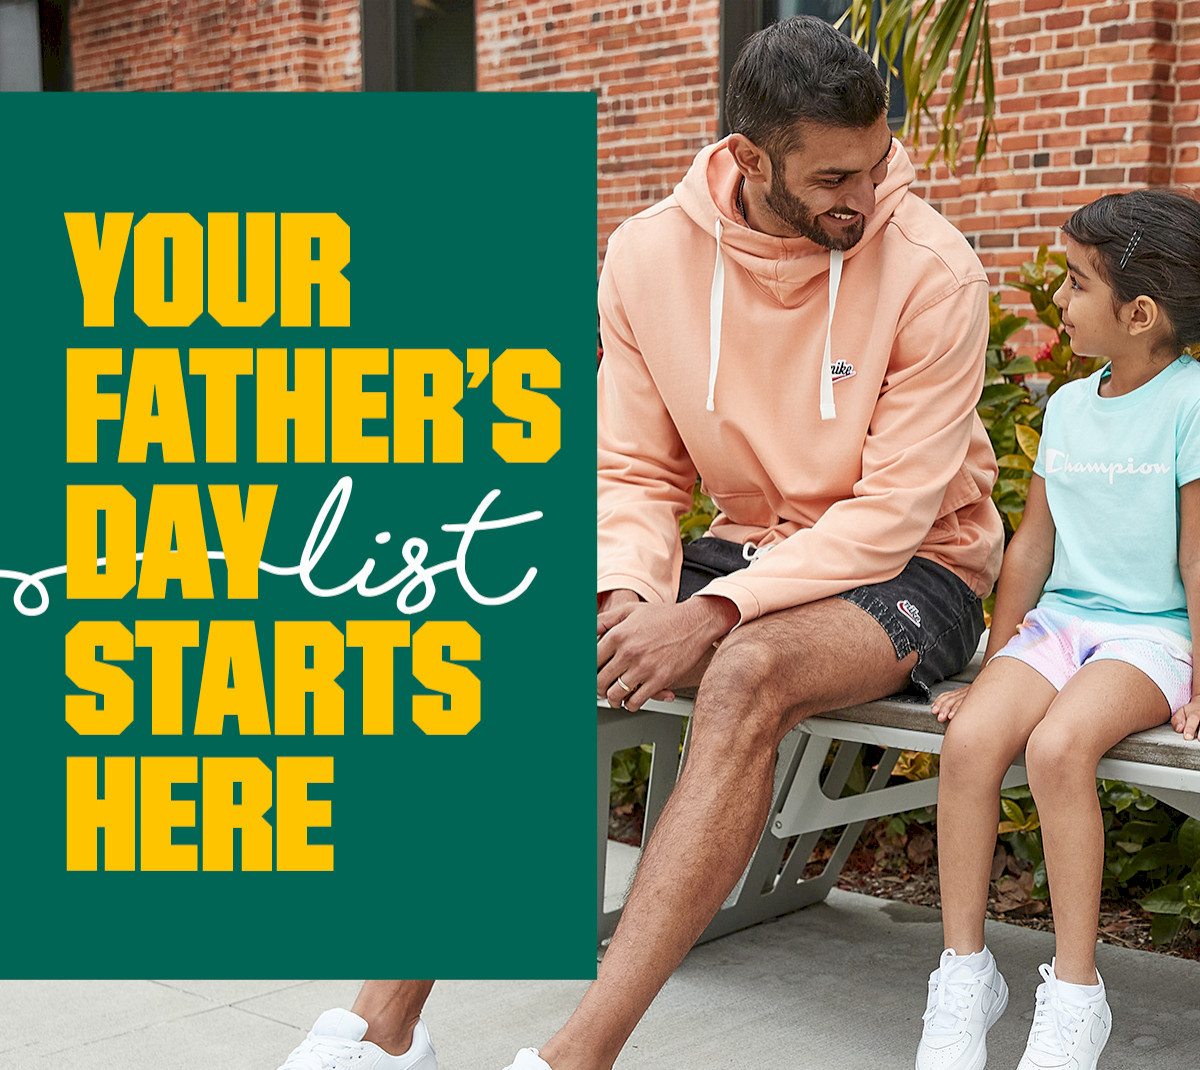 Your father's day list starts here.